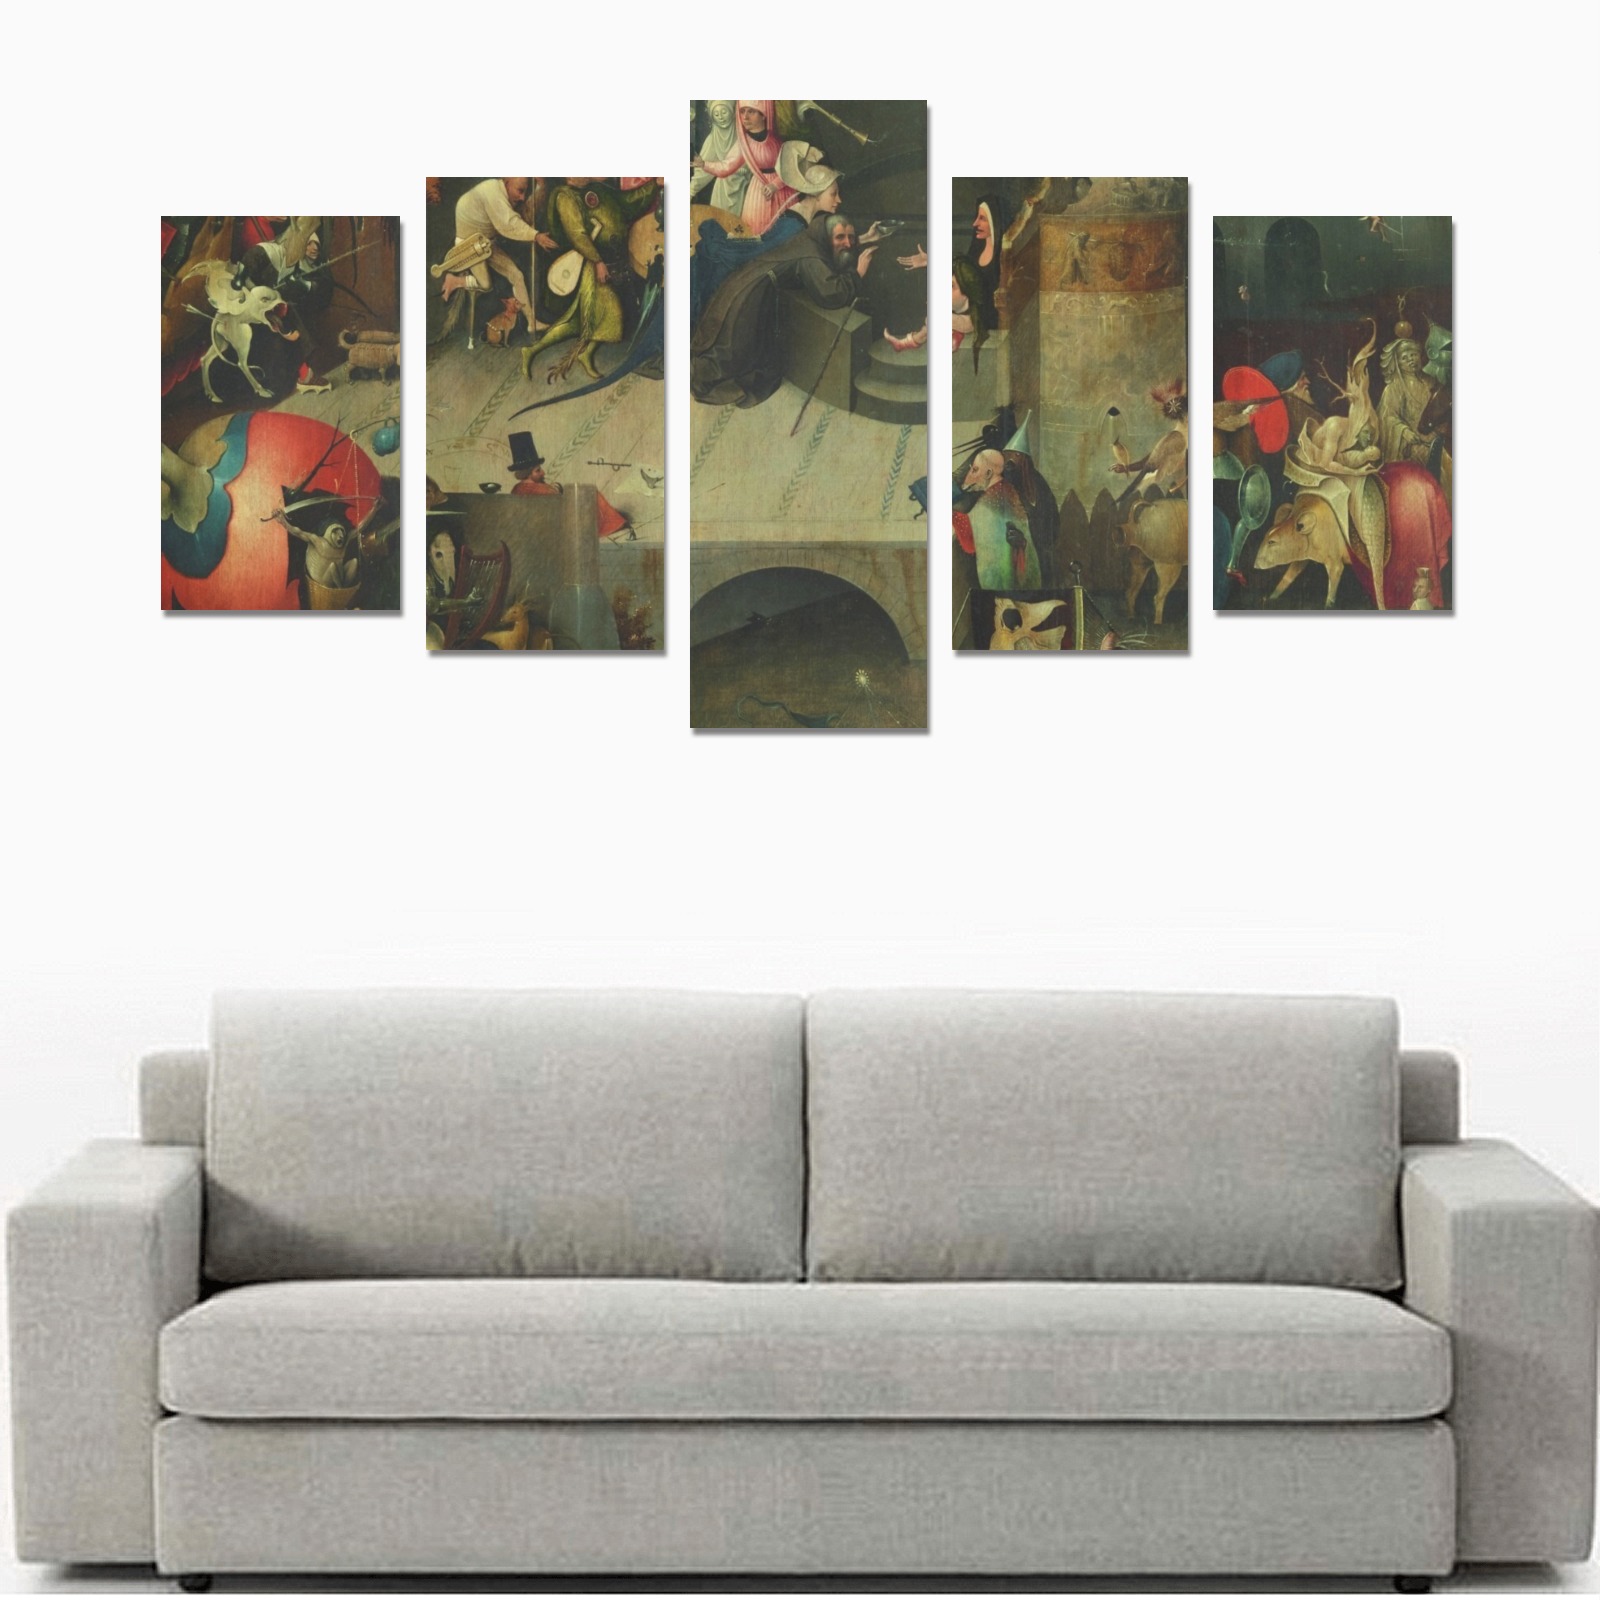 Hieronymus Bosch-The Temptation of St Anthony Canvas Print Sets C (No Frame)